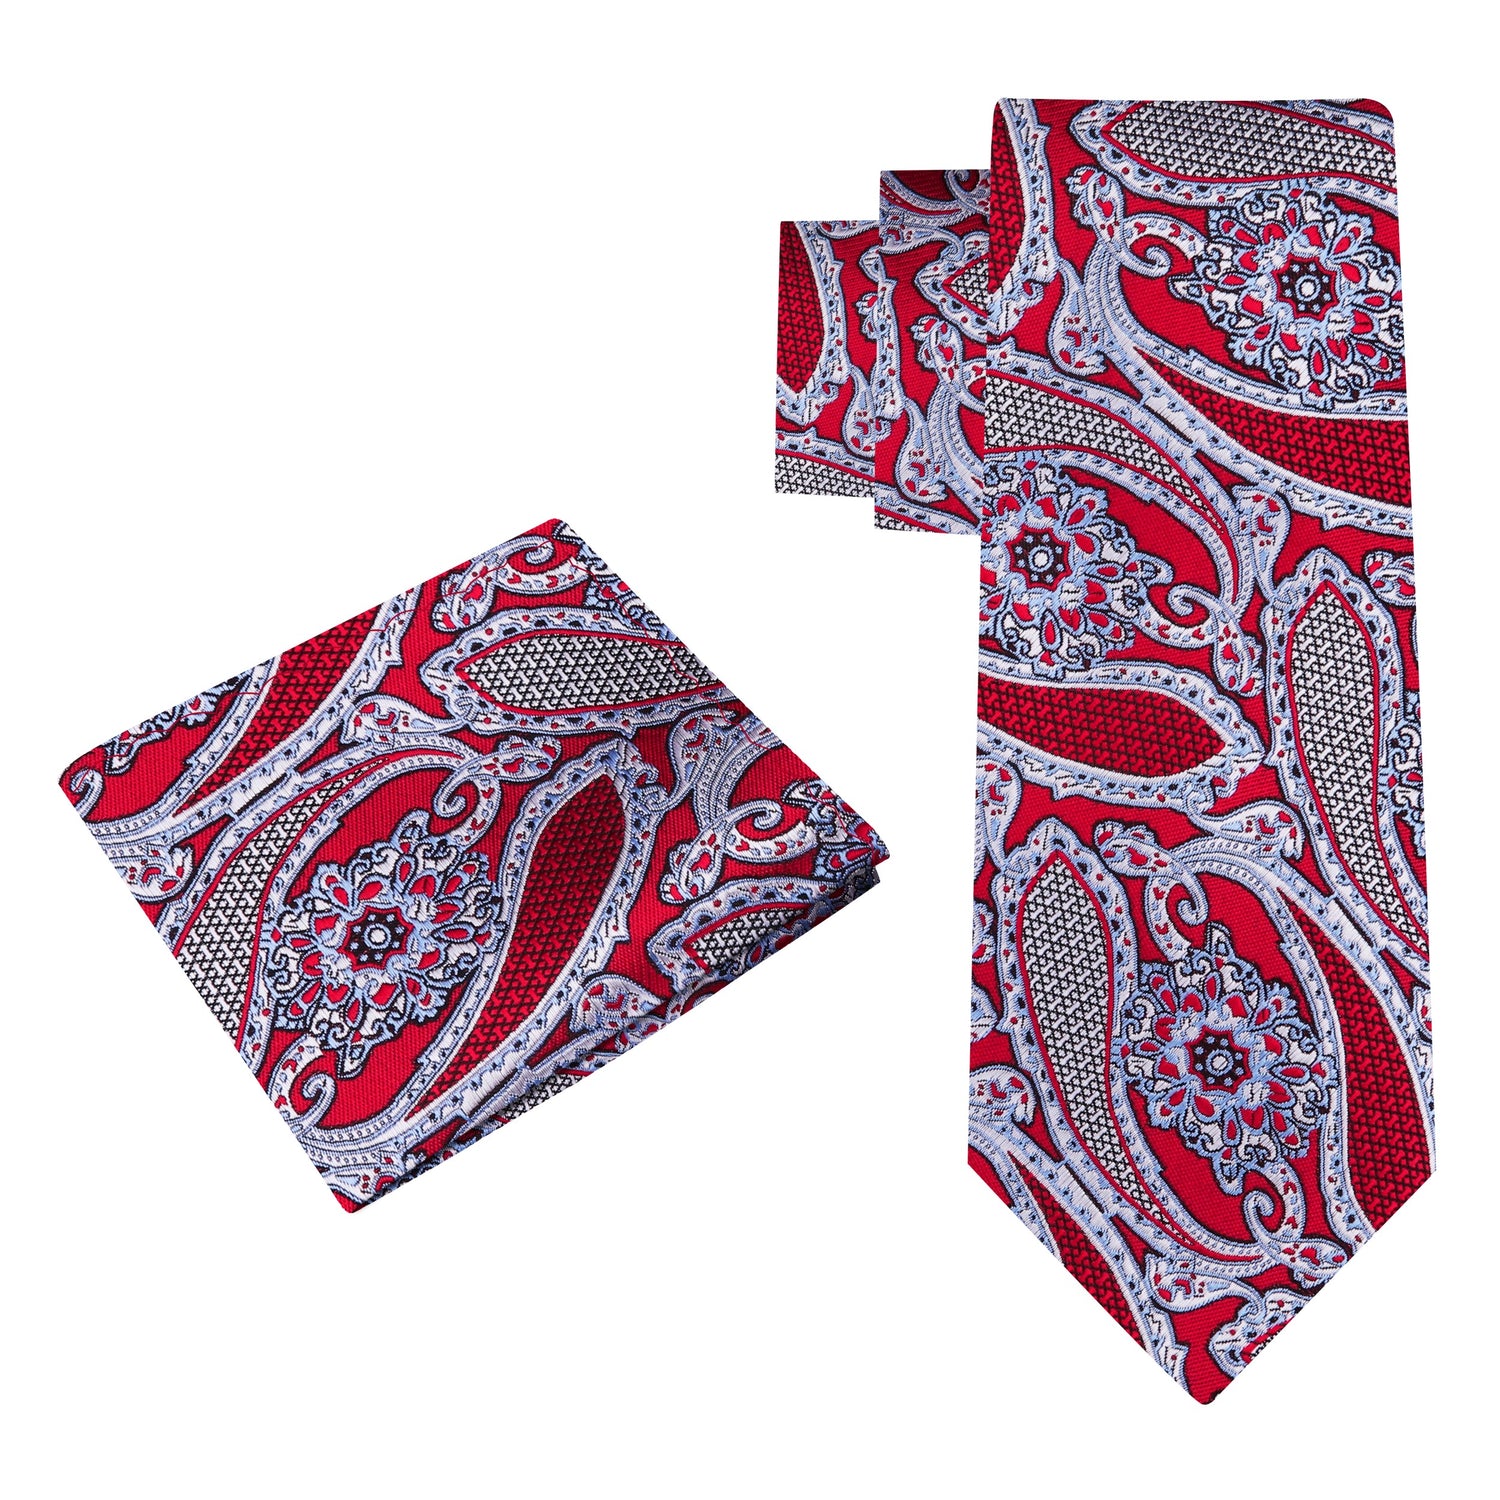 Alt View: A Red, Black, White Paisley Pattern Silk Necktie, With Matching Pocket Square